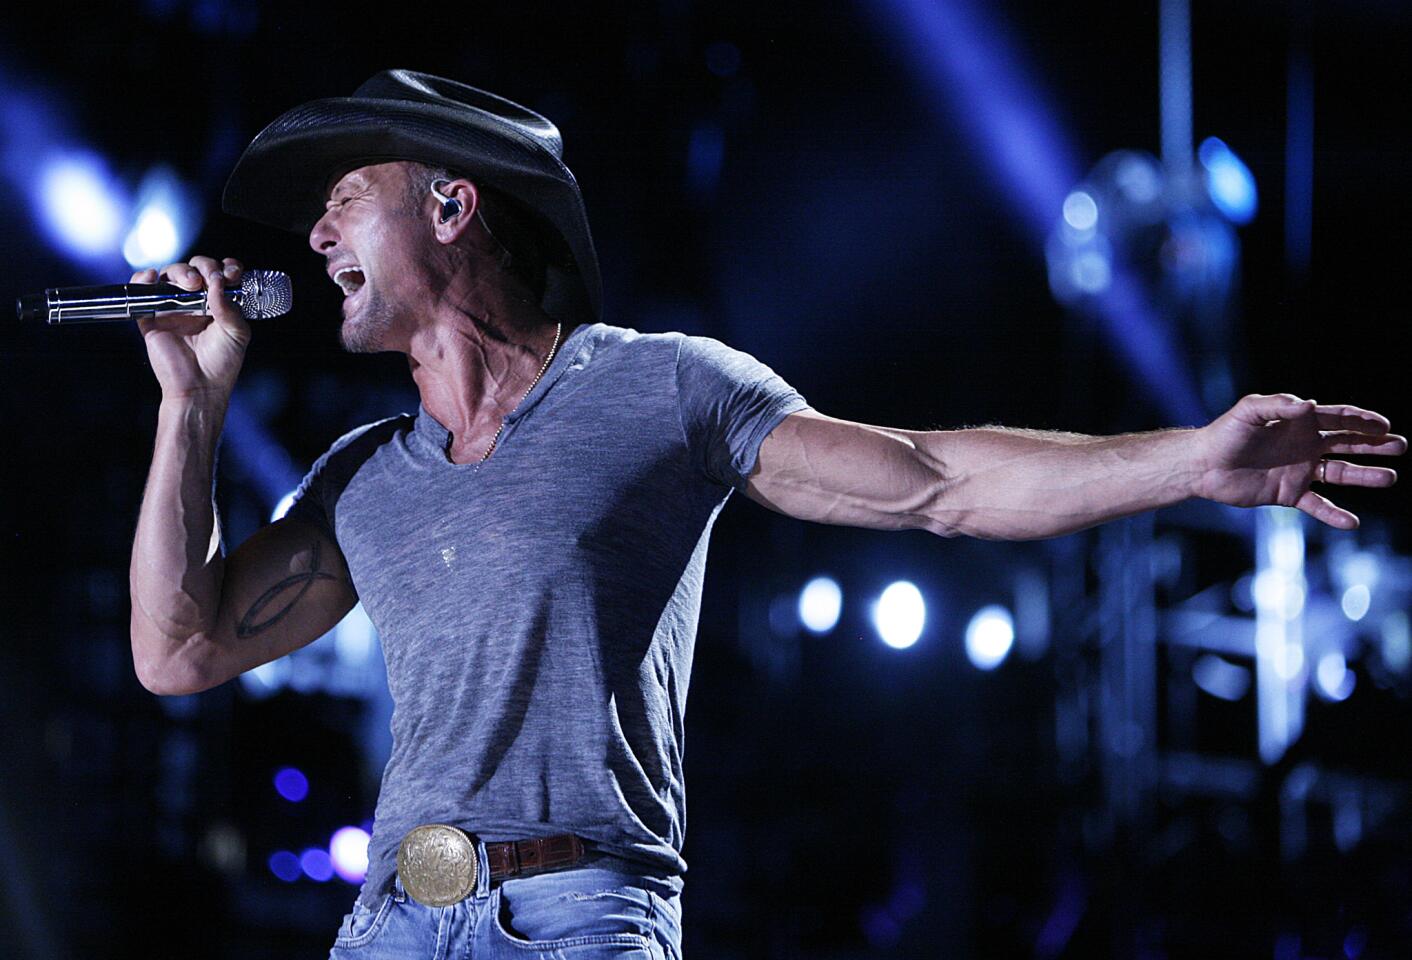 Tim McGraw swats a fan during his Atlanta concert